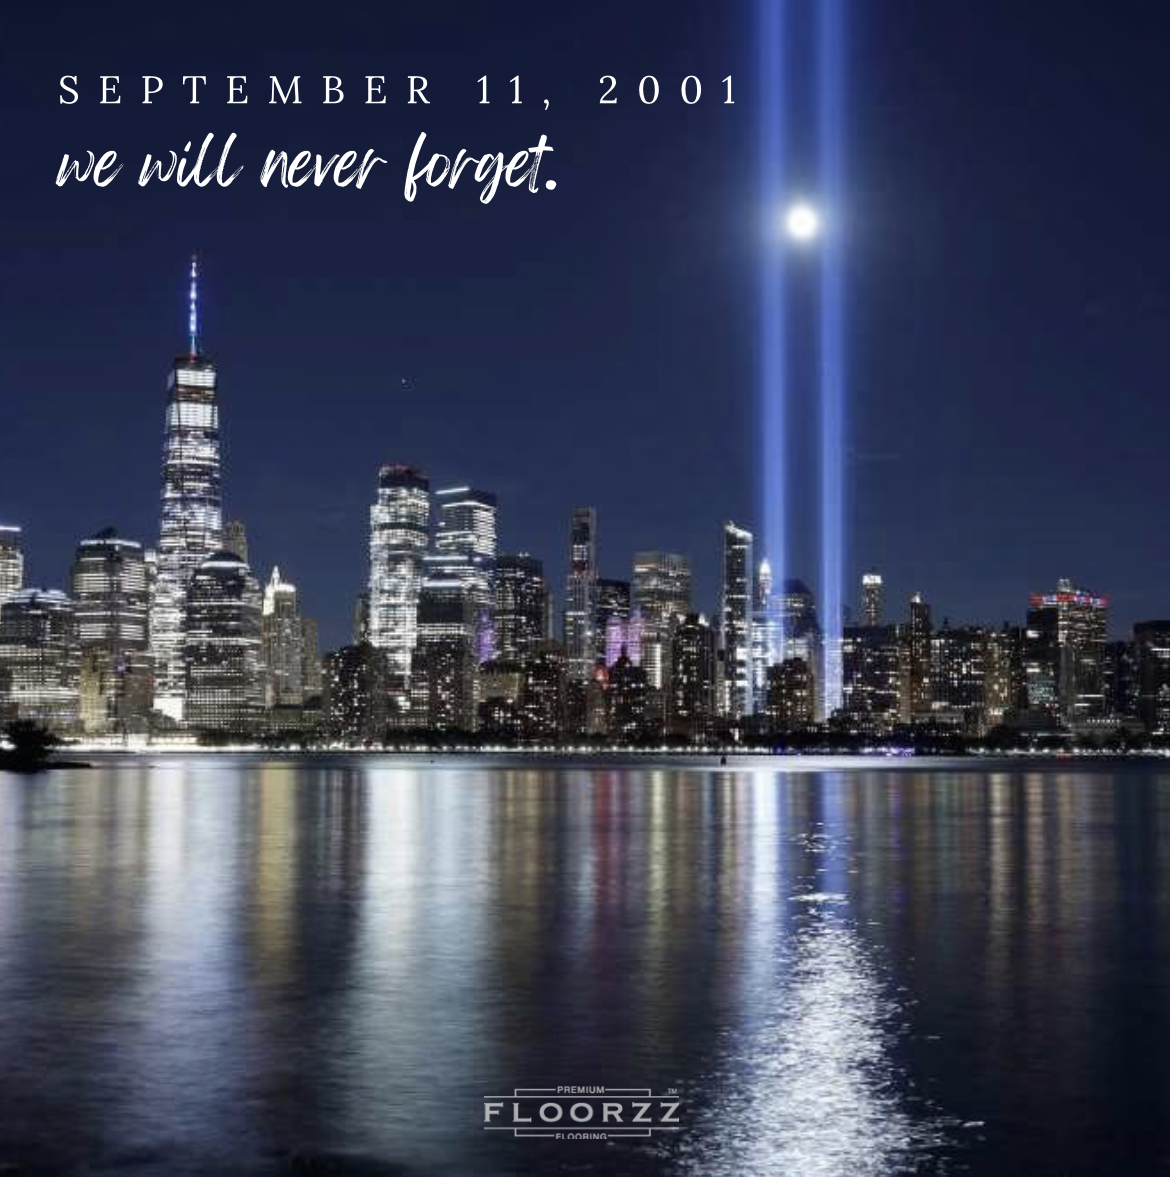 We will never forget. 🇺🇸

#911 #neverforget #september11 #worldtradecenter #twintowers #heroes #memorial #newyork #nyc #groundzero #walkofremembrance #usa #firstresponders #nypd #fdny #america #wewillneverforget #freedomtower #worldtradecentermemorial